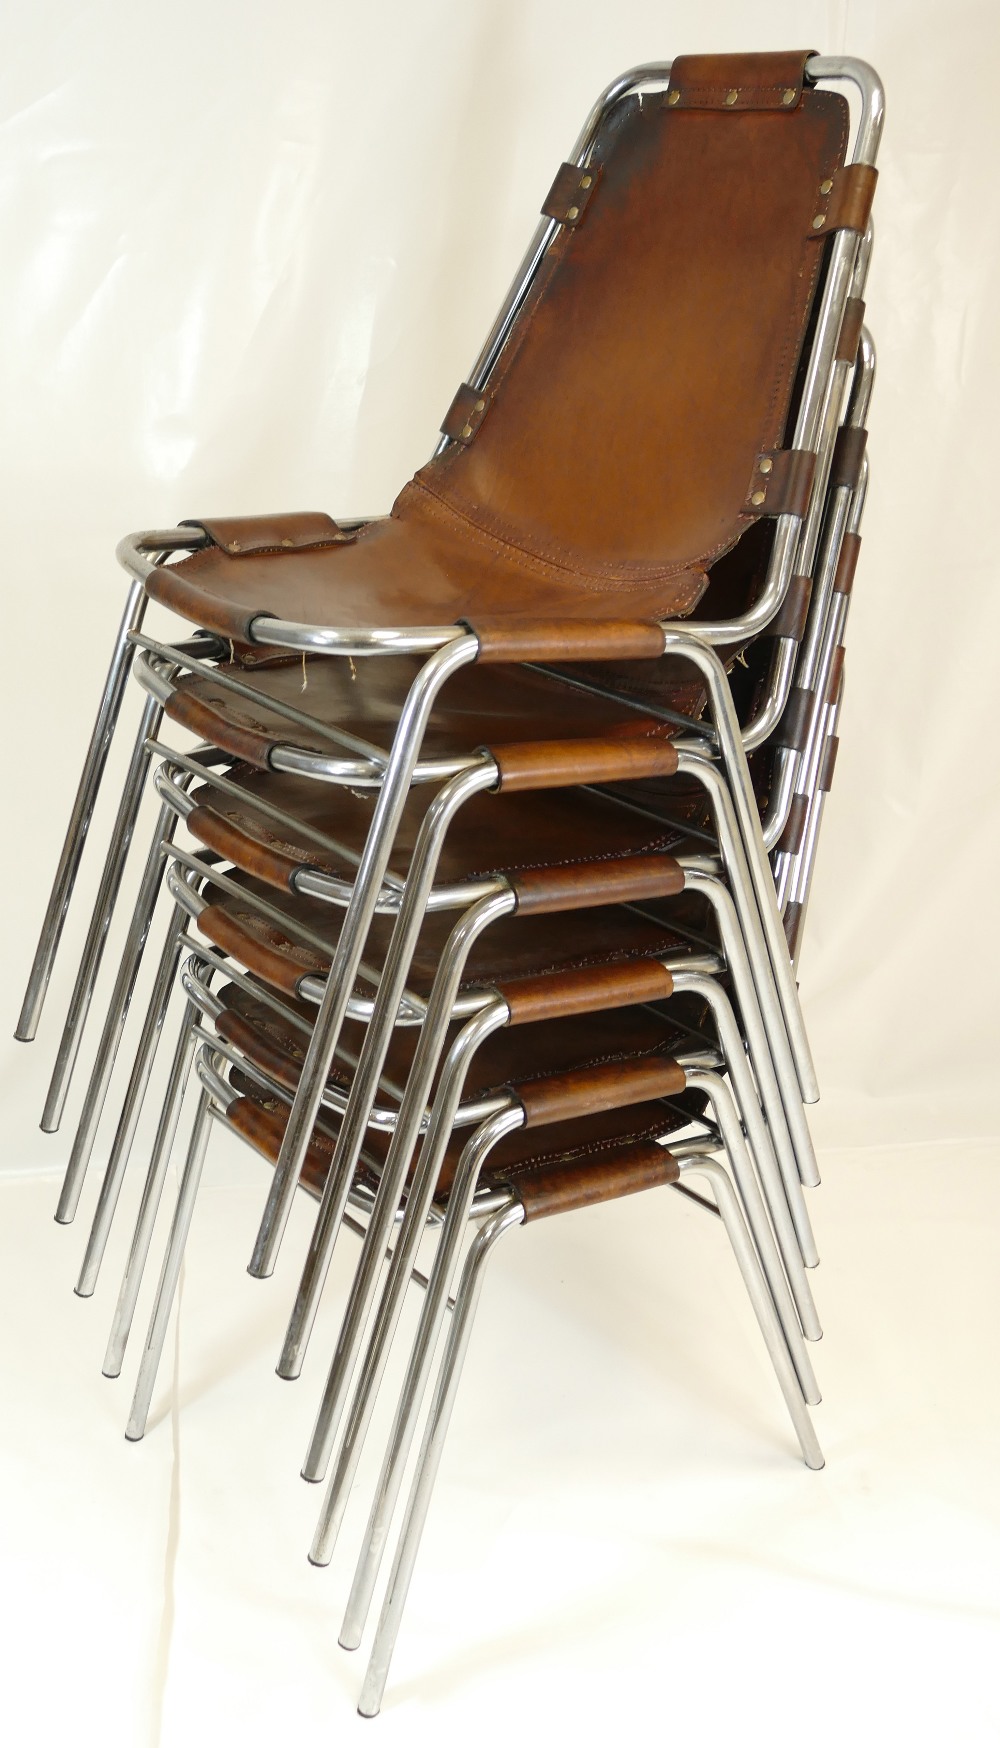 Set of 6 leather and chrome stacking chairs "Les Arcs" by Charlotte Perriand 1960s (6) - Image 2 of 6